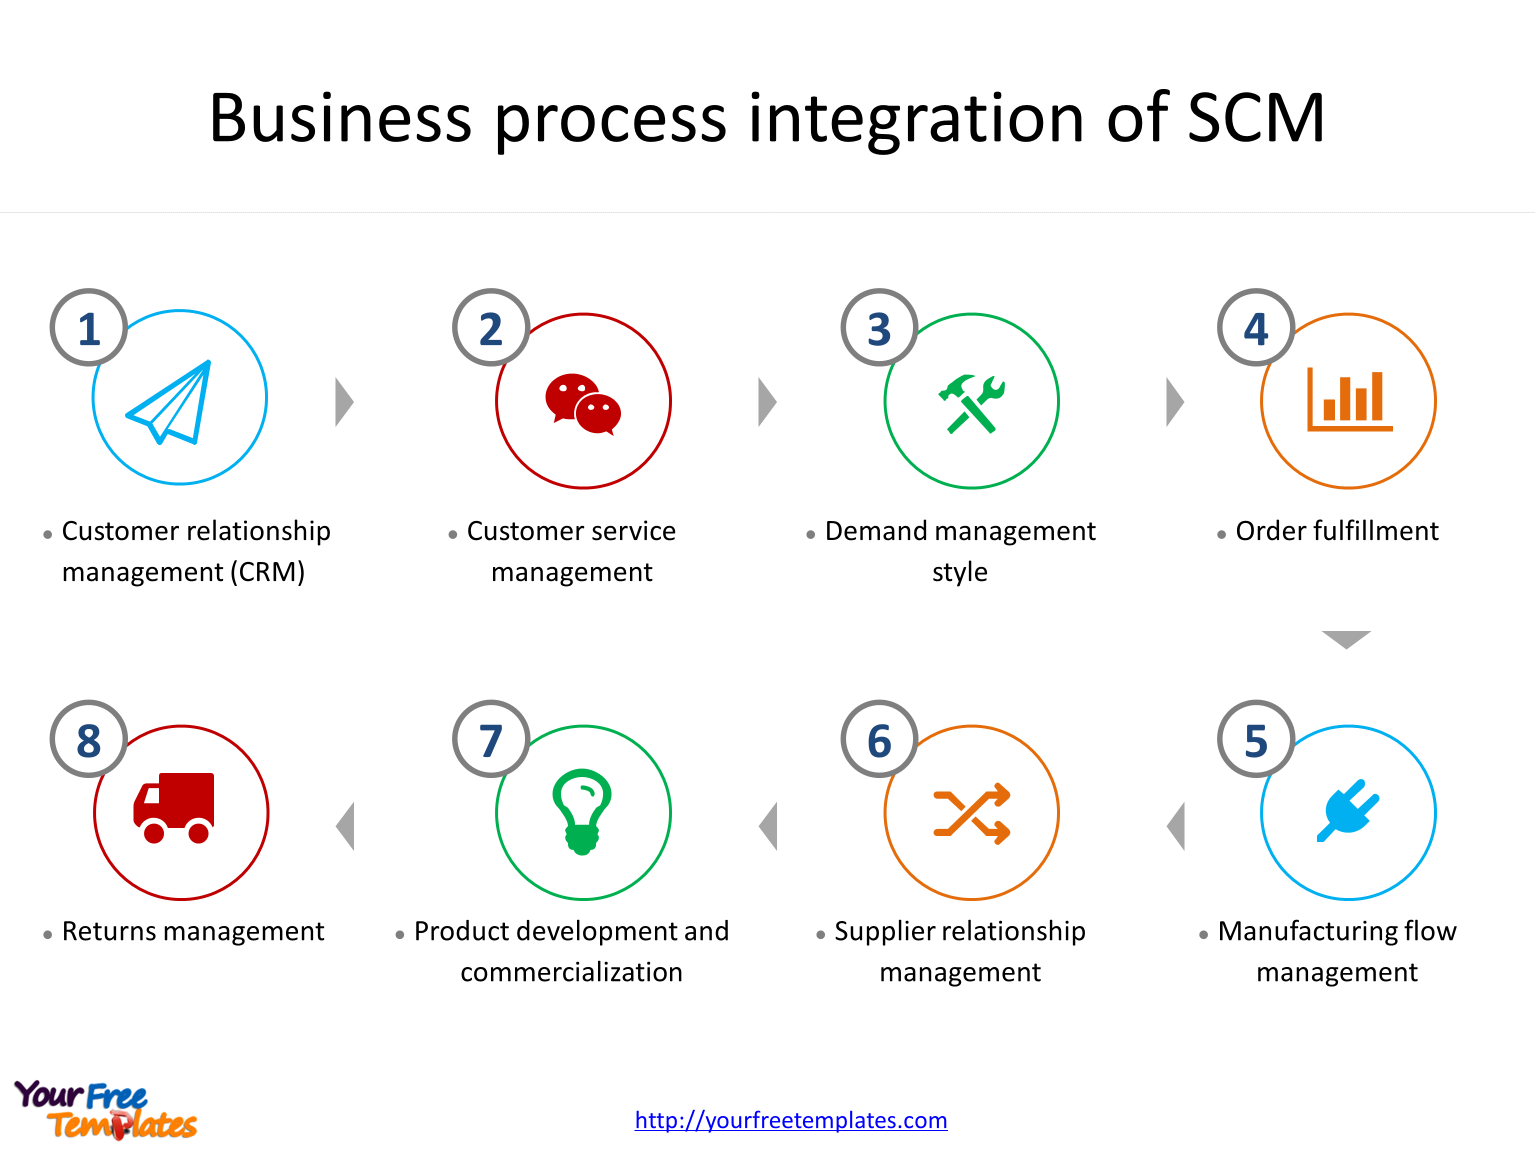 Supply chain management with Business process integration.